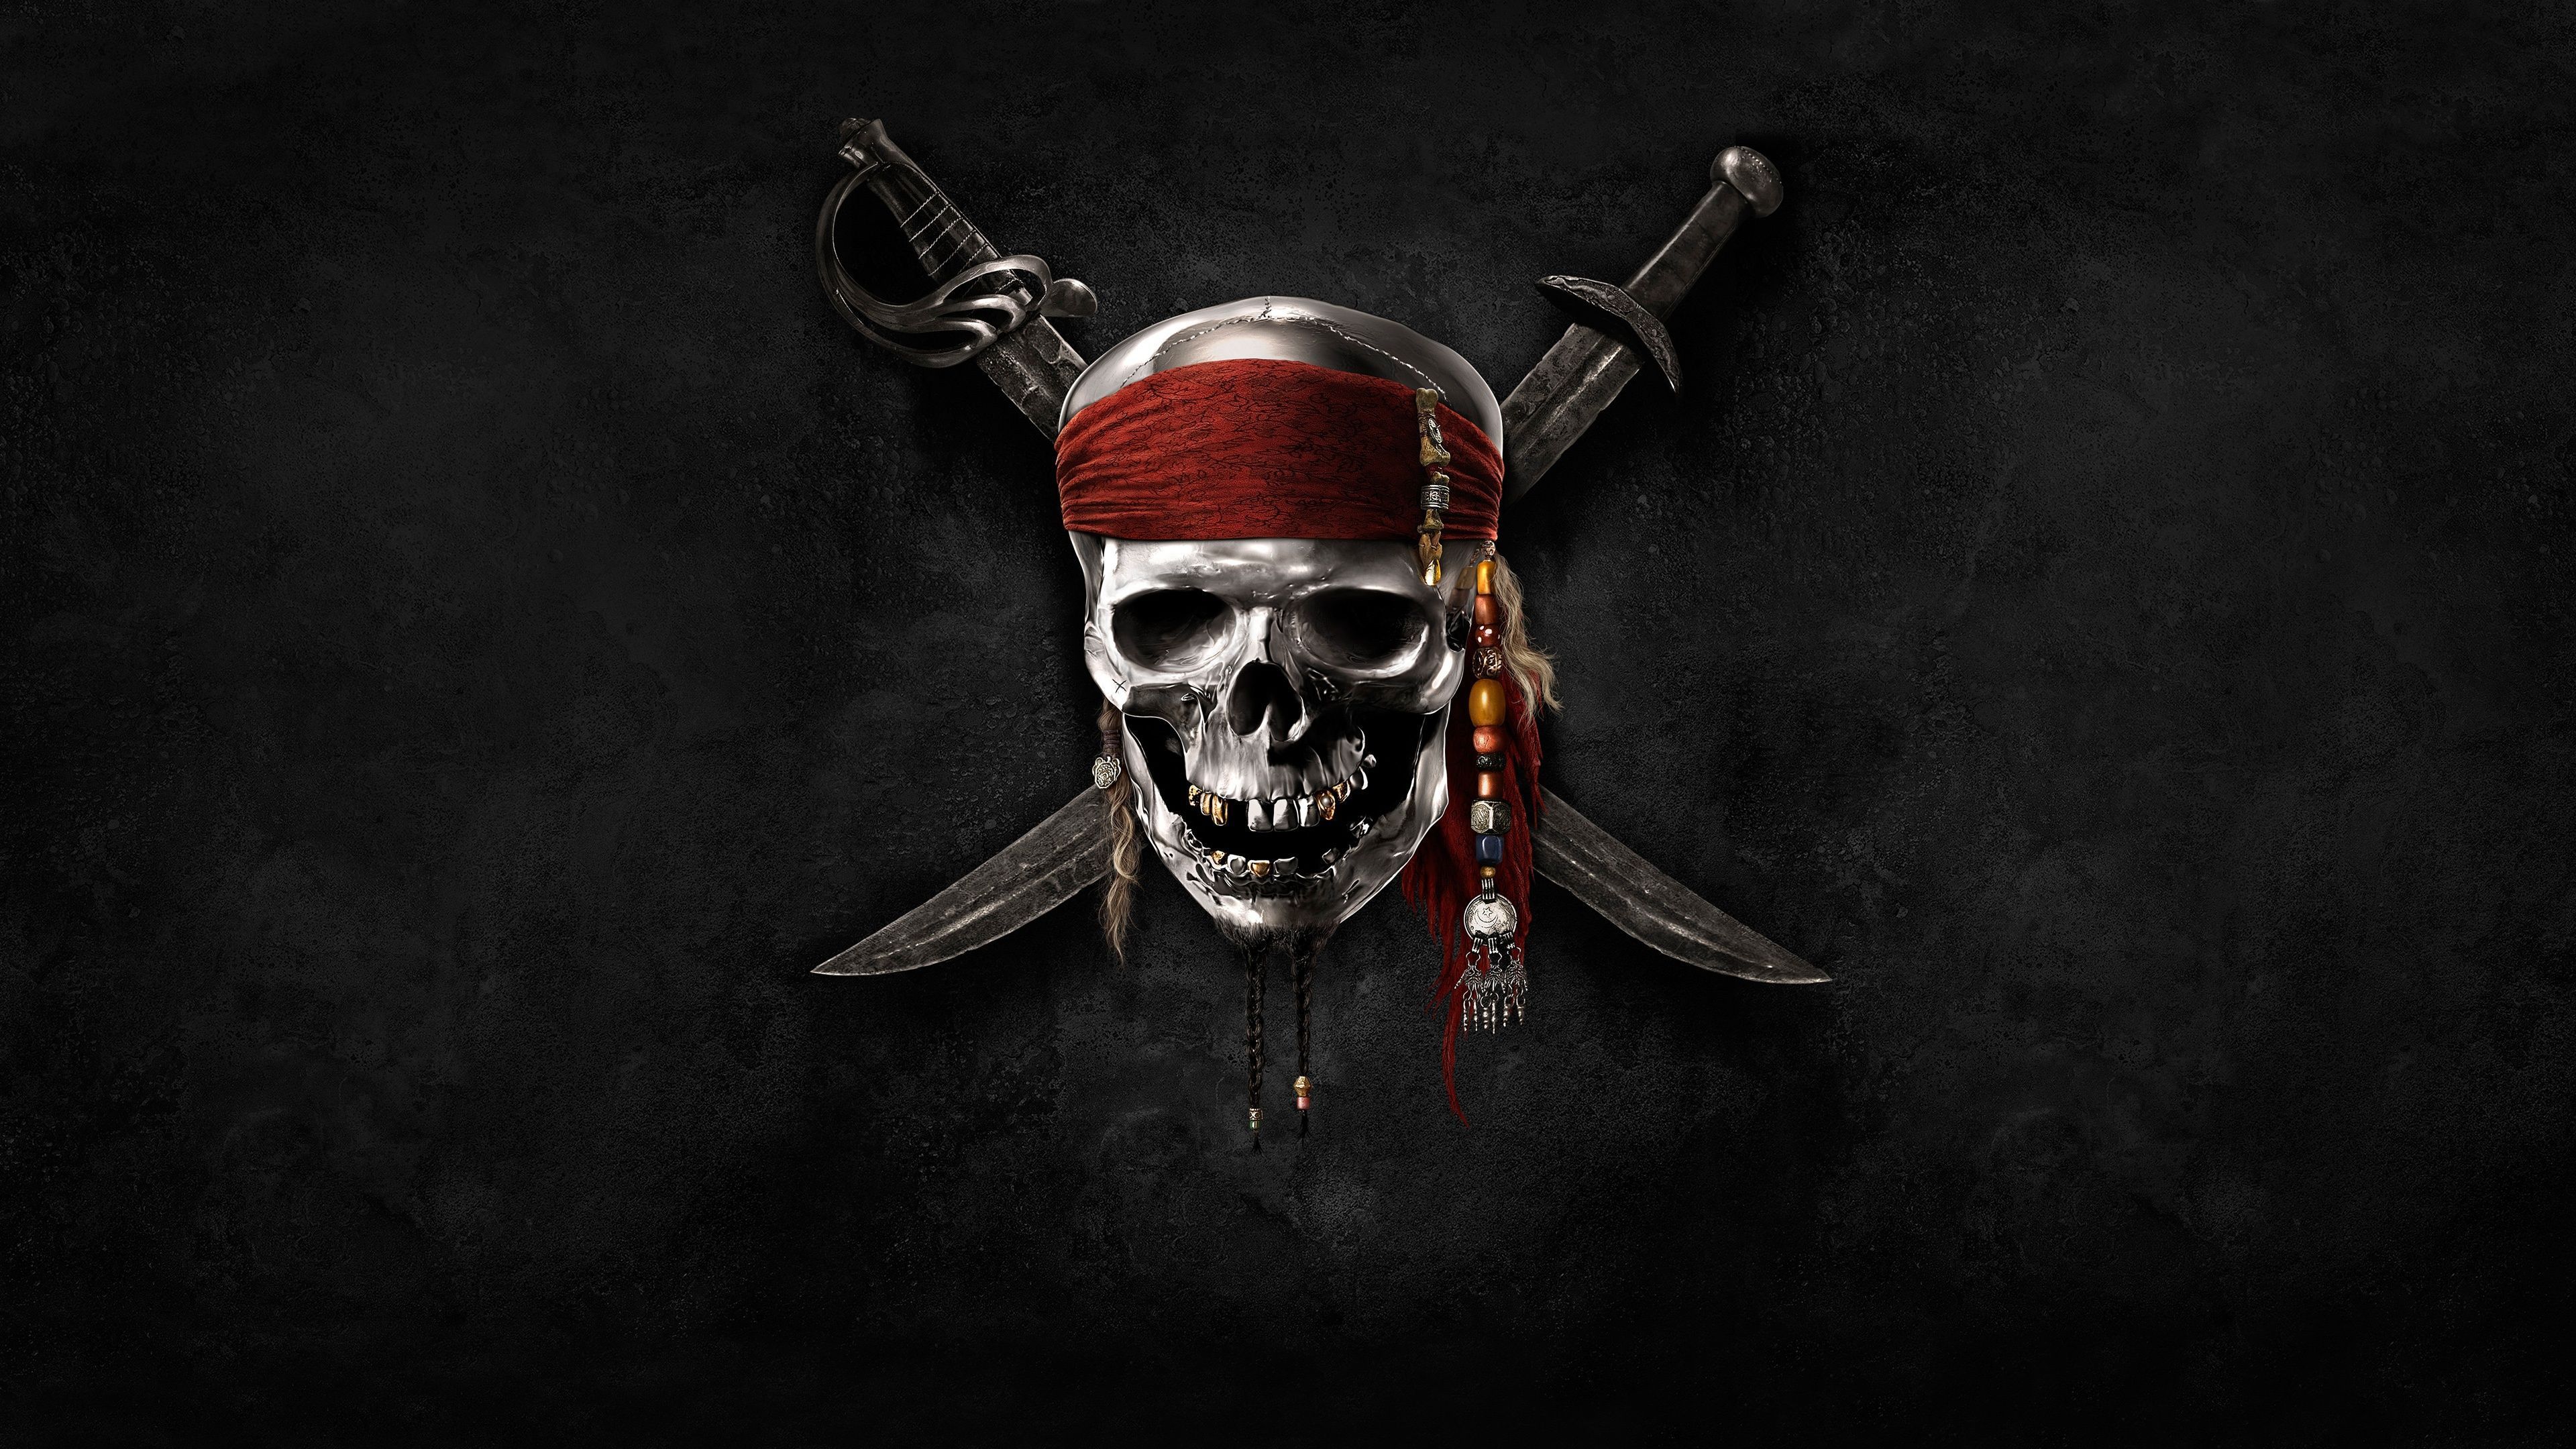 HD Background Pirates Logo Pirates of the Caribbean Skull Knife ...